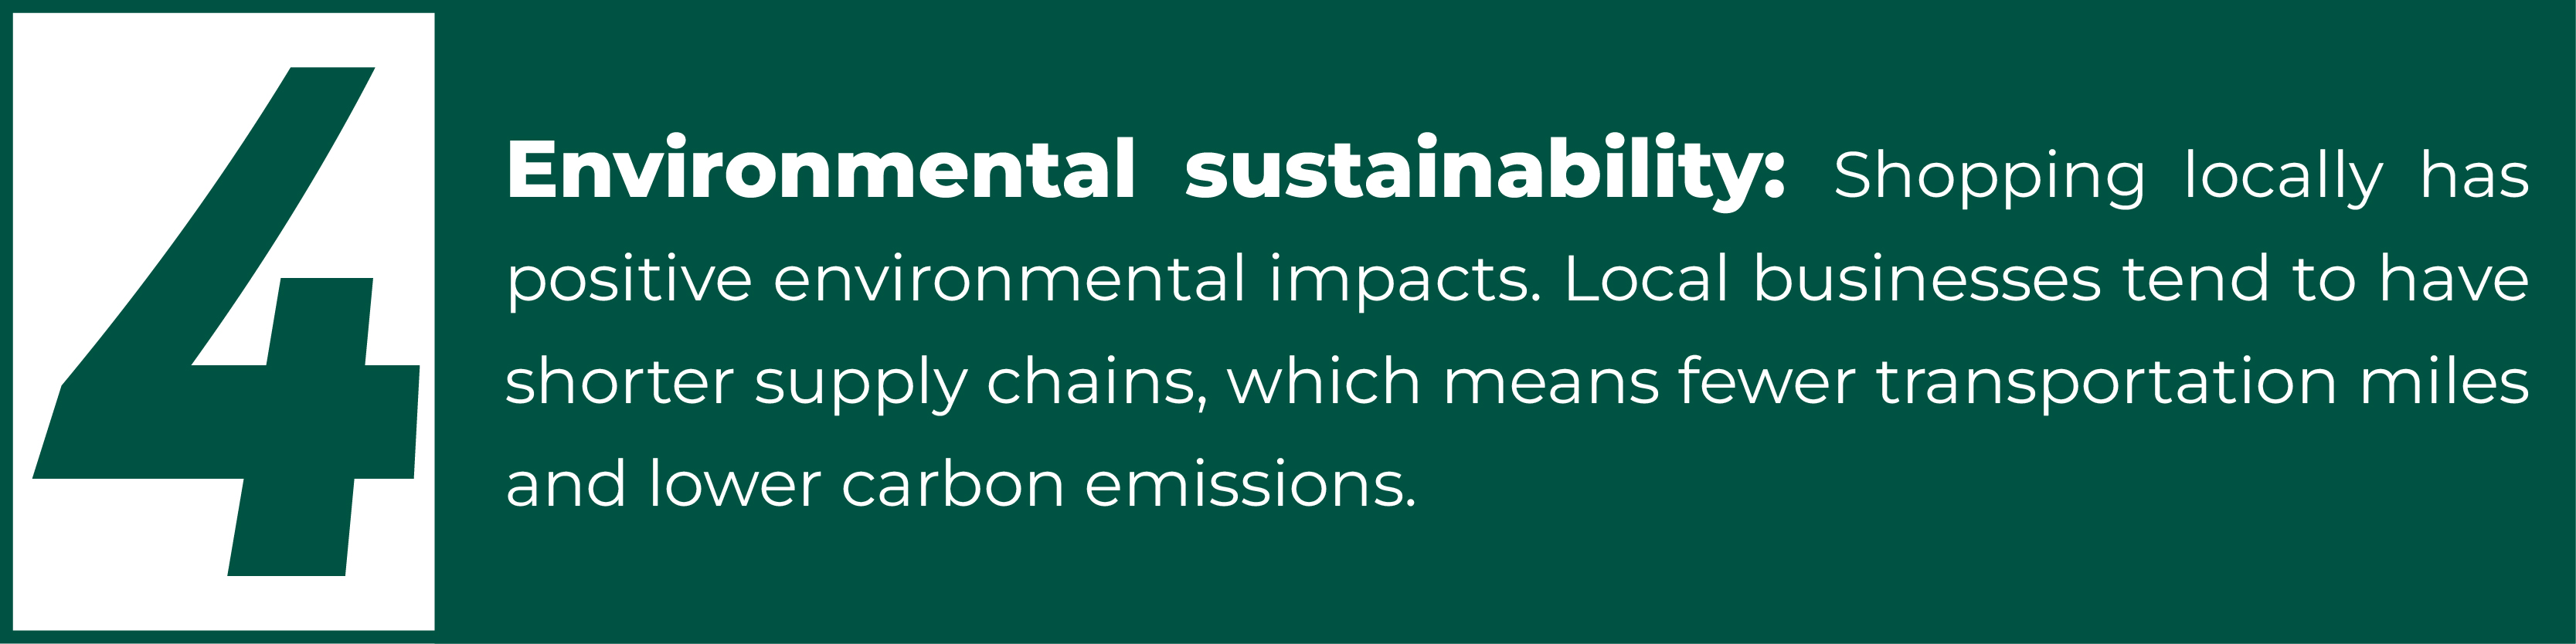 Environmental sustainability: Shopping locally has positive environmental impacts. Local businesses tend to have shorter supply chains, which means fewer transportation miles and lower carbon emissions. 